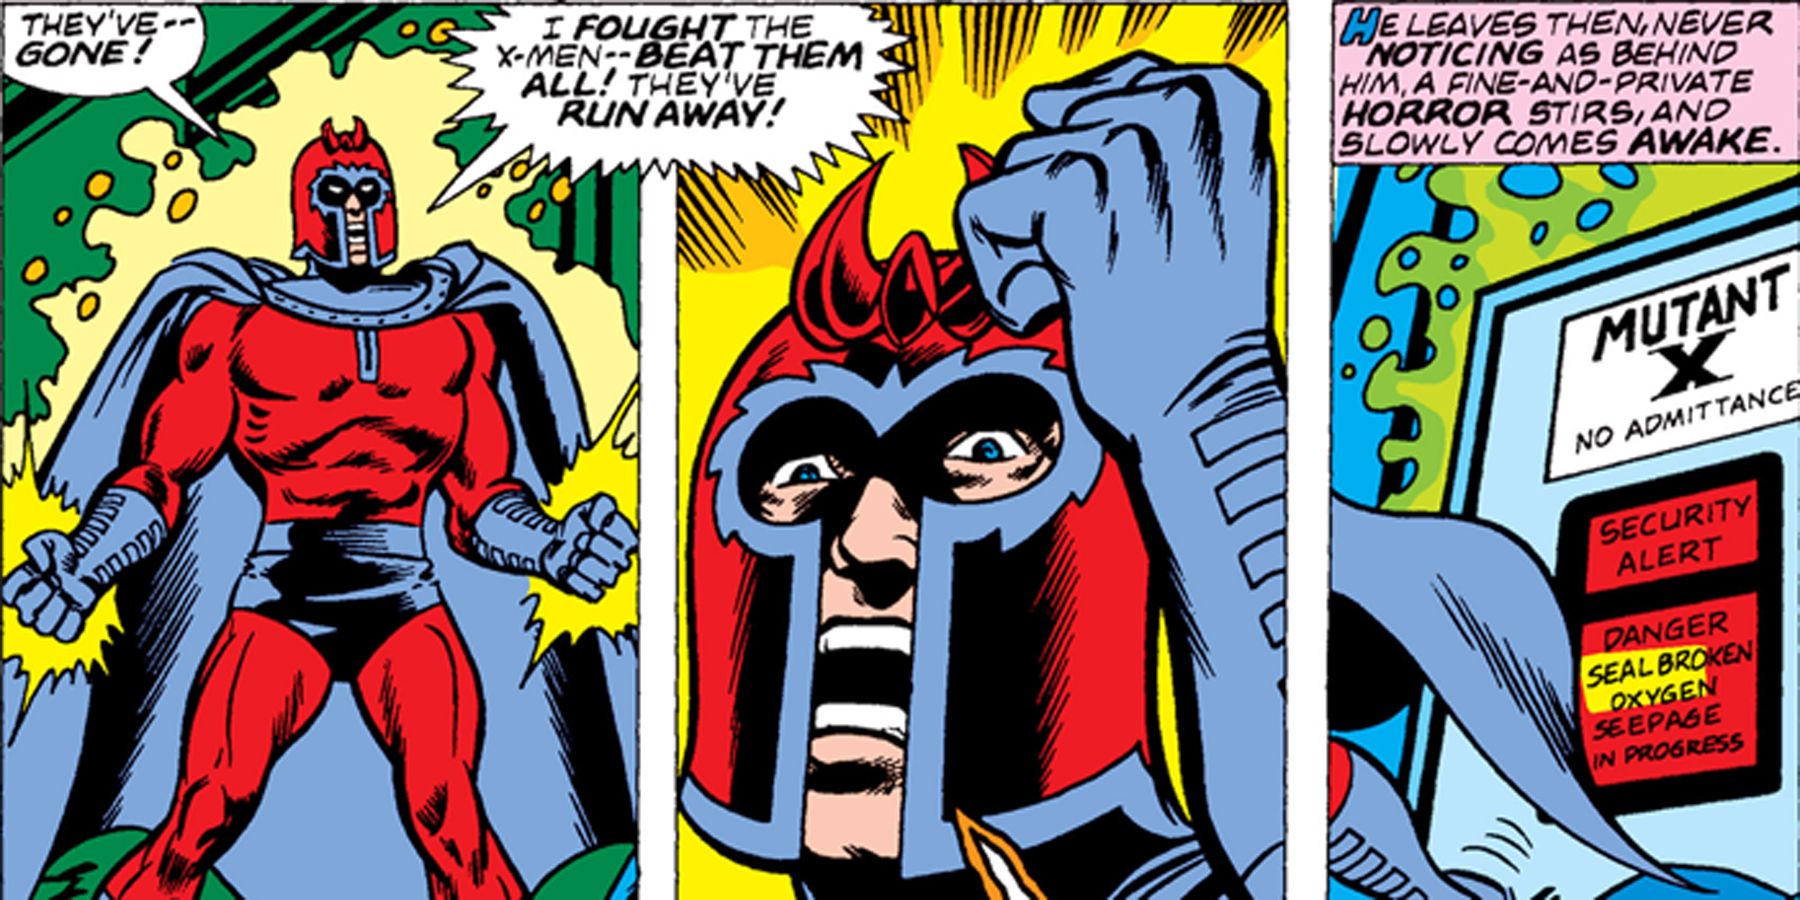 Magneto forces the X-Men to run away from a fight